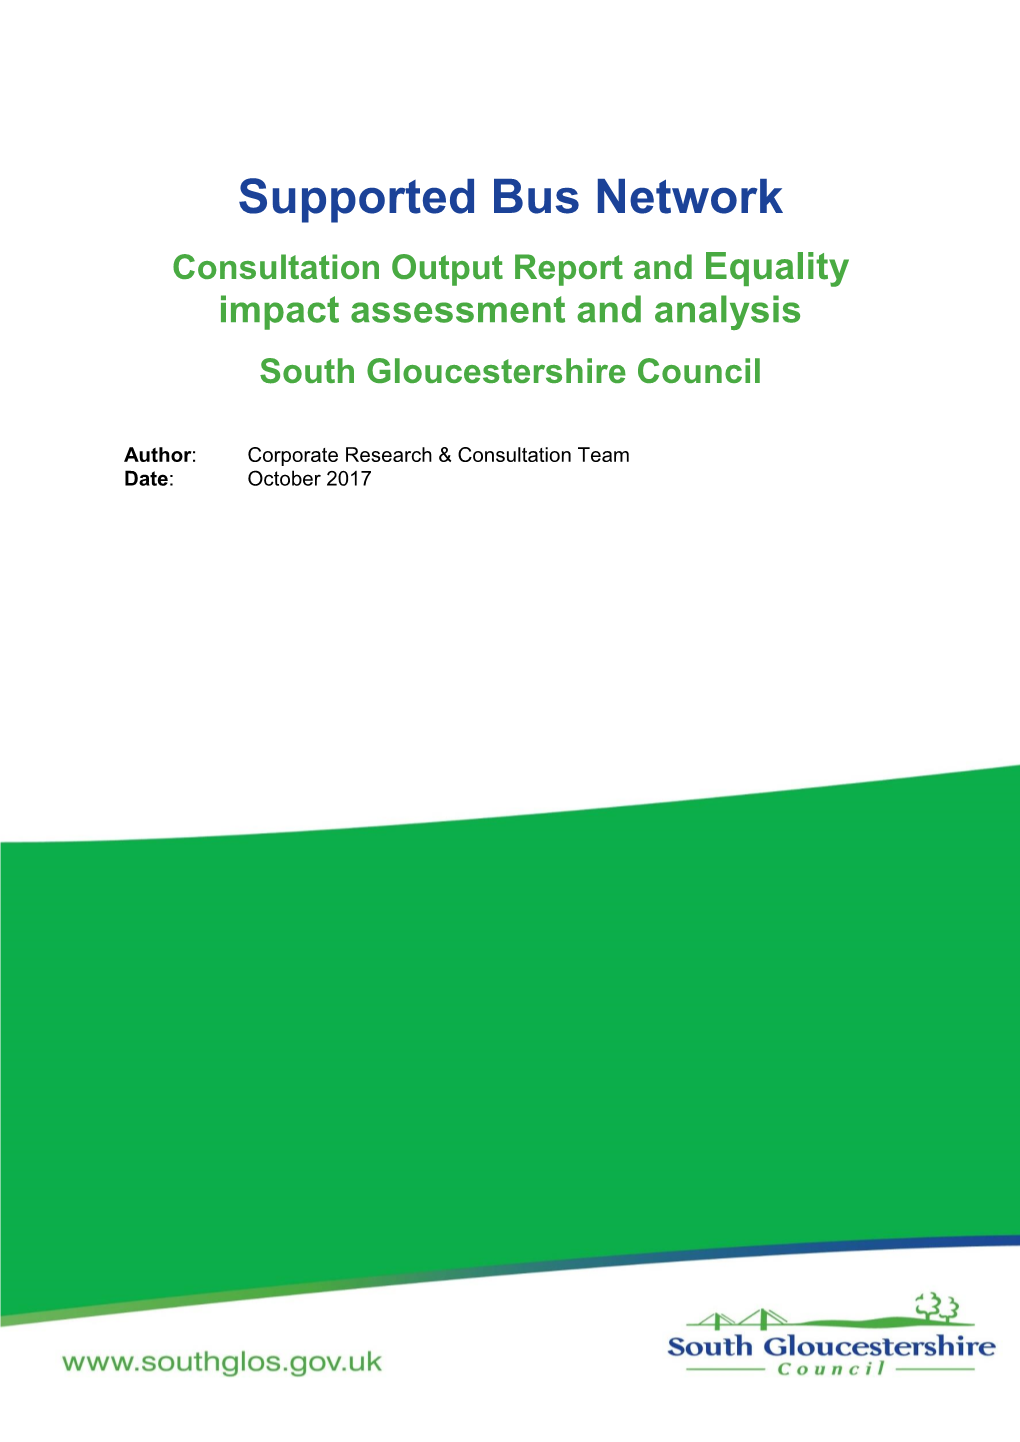 Supported Bus Network Consultation Output Report and Equality Impact Assessment and Analysis South Gloucestershire Council